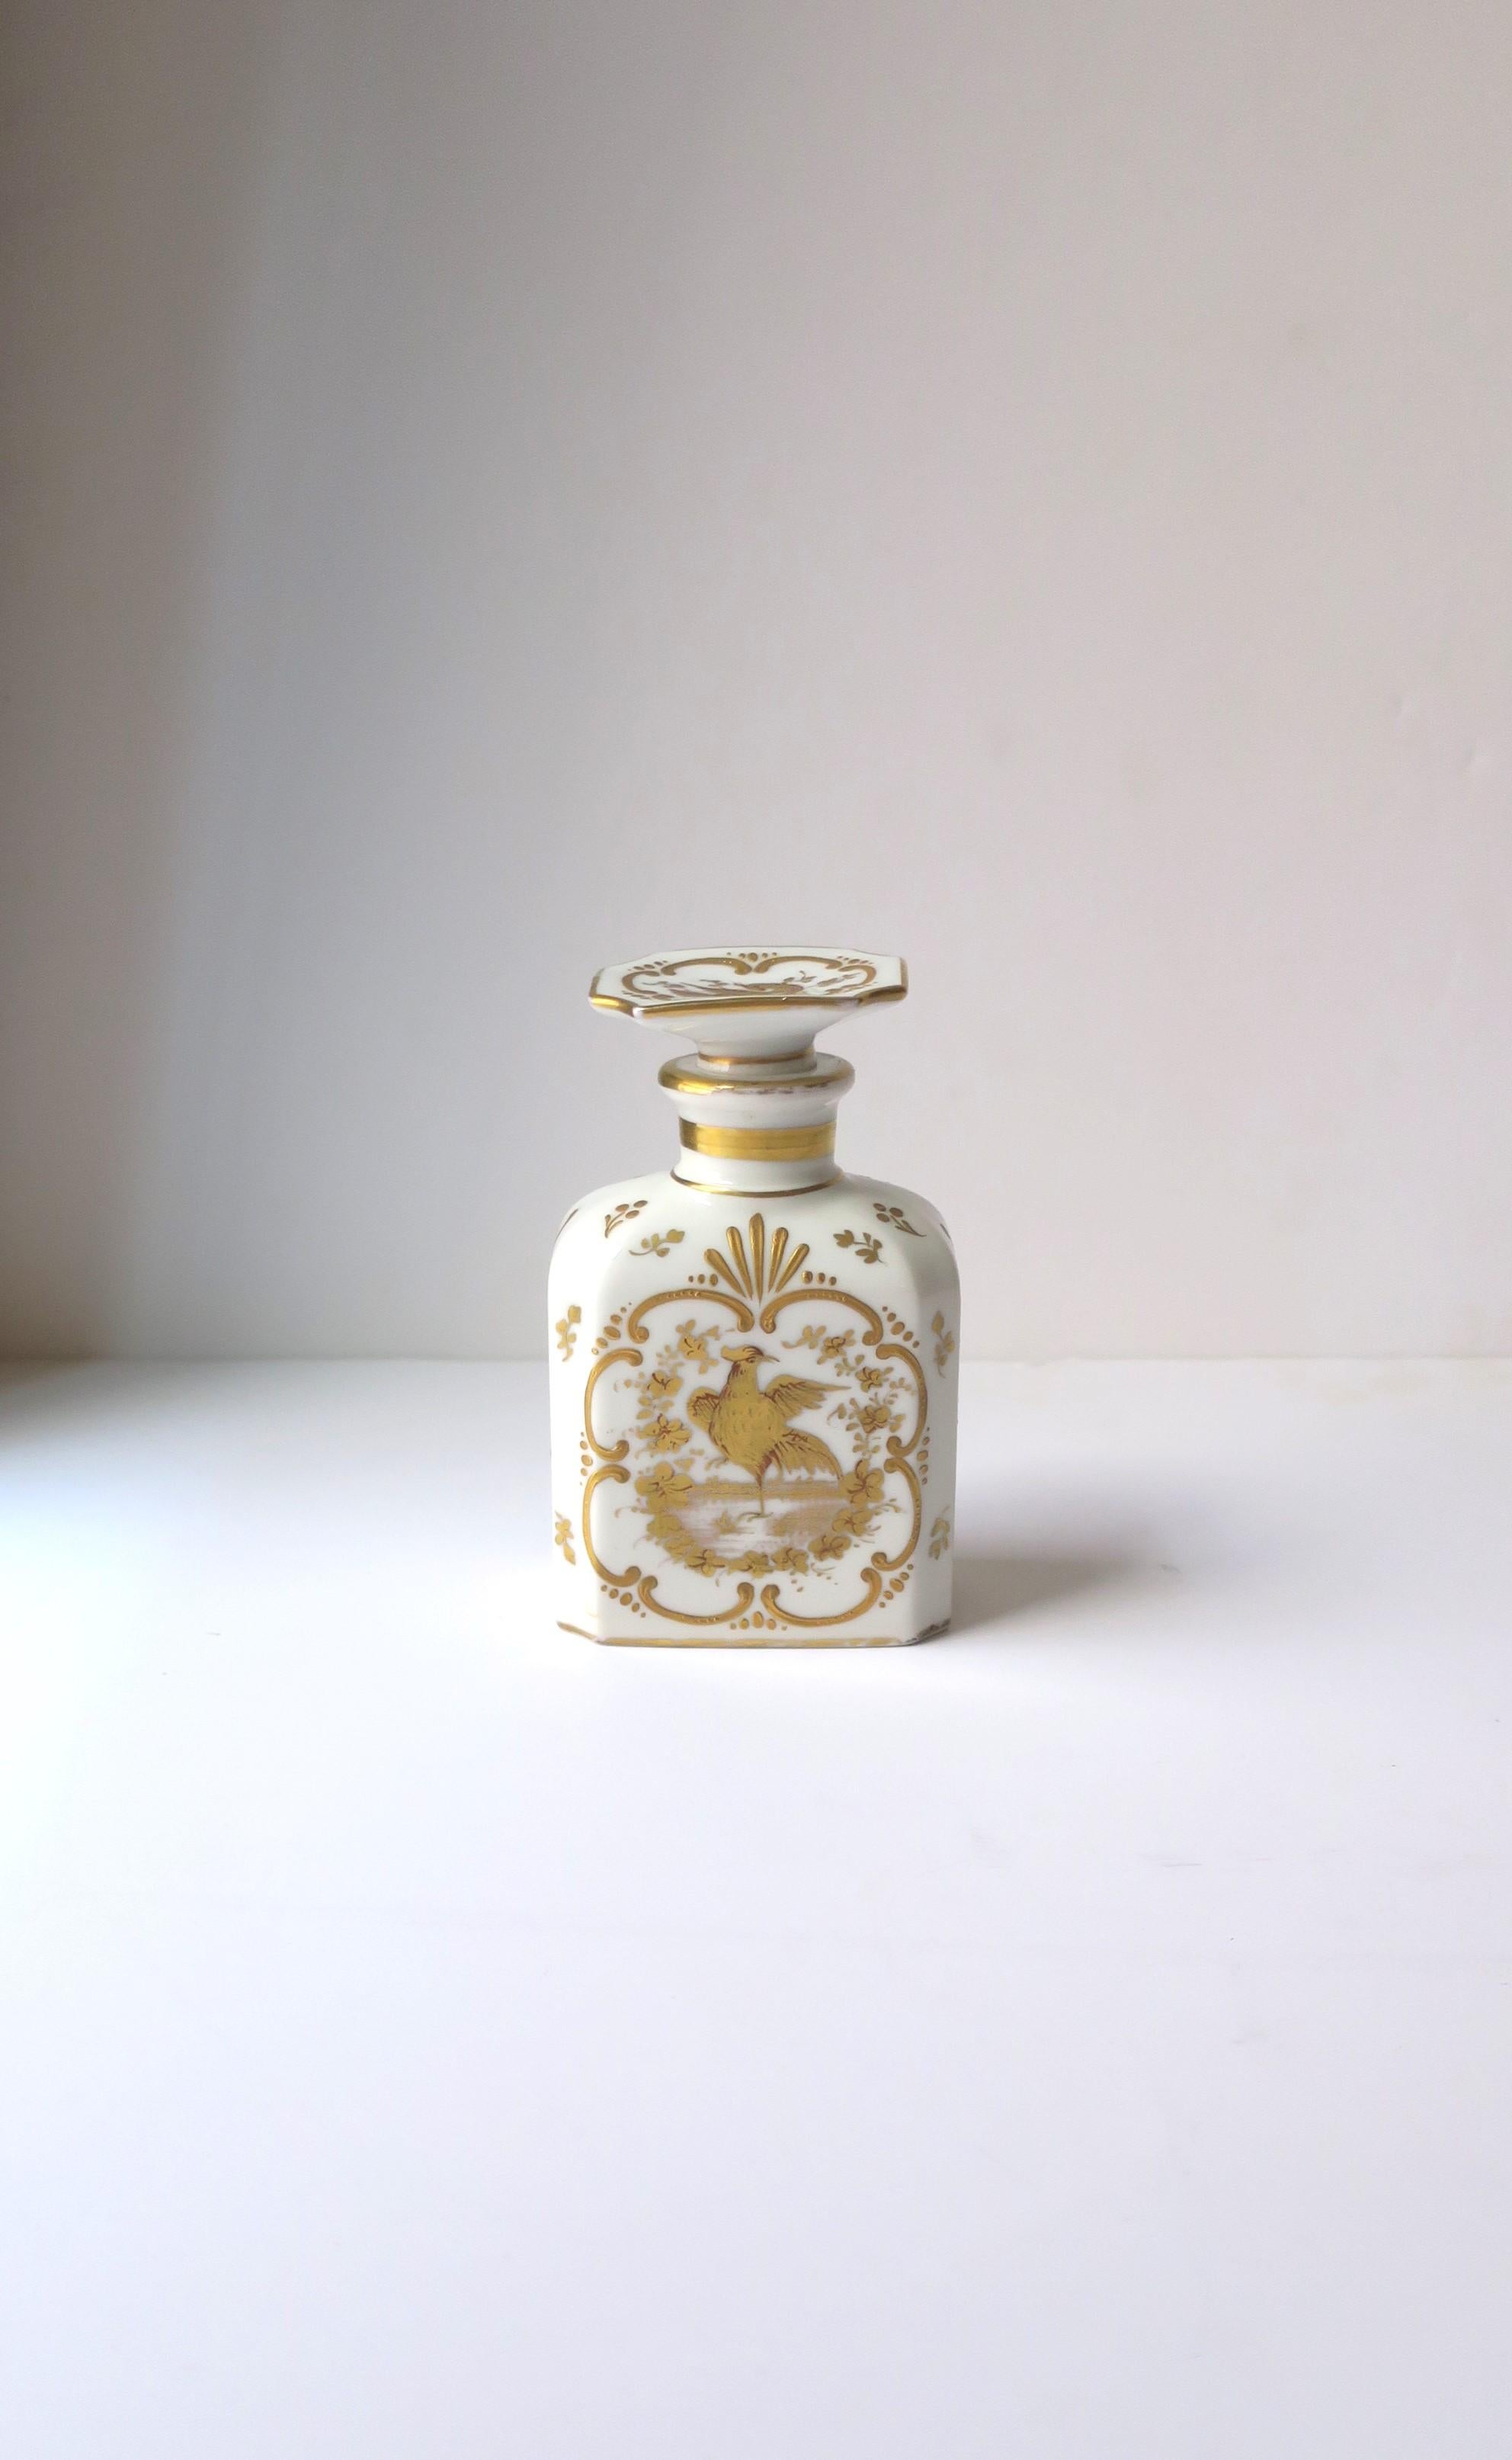 20th Century Italian White and Gold Porcelain Vanity Bottle with Bird Design Rococo Style For Sale